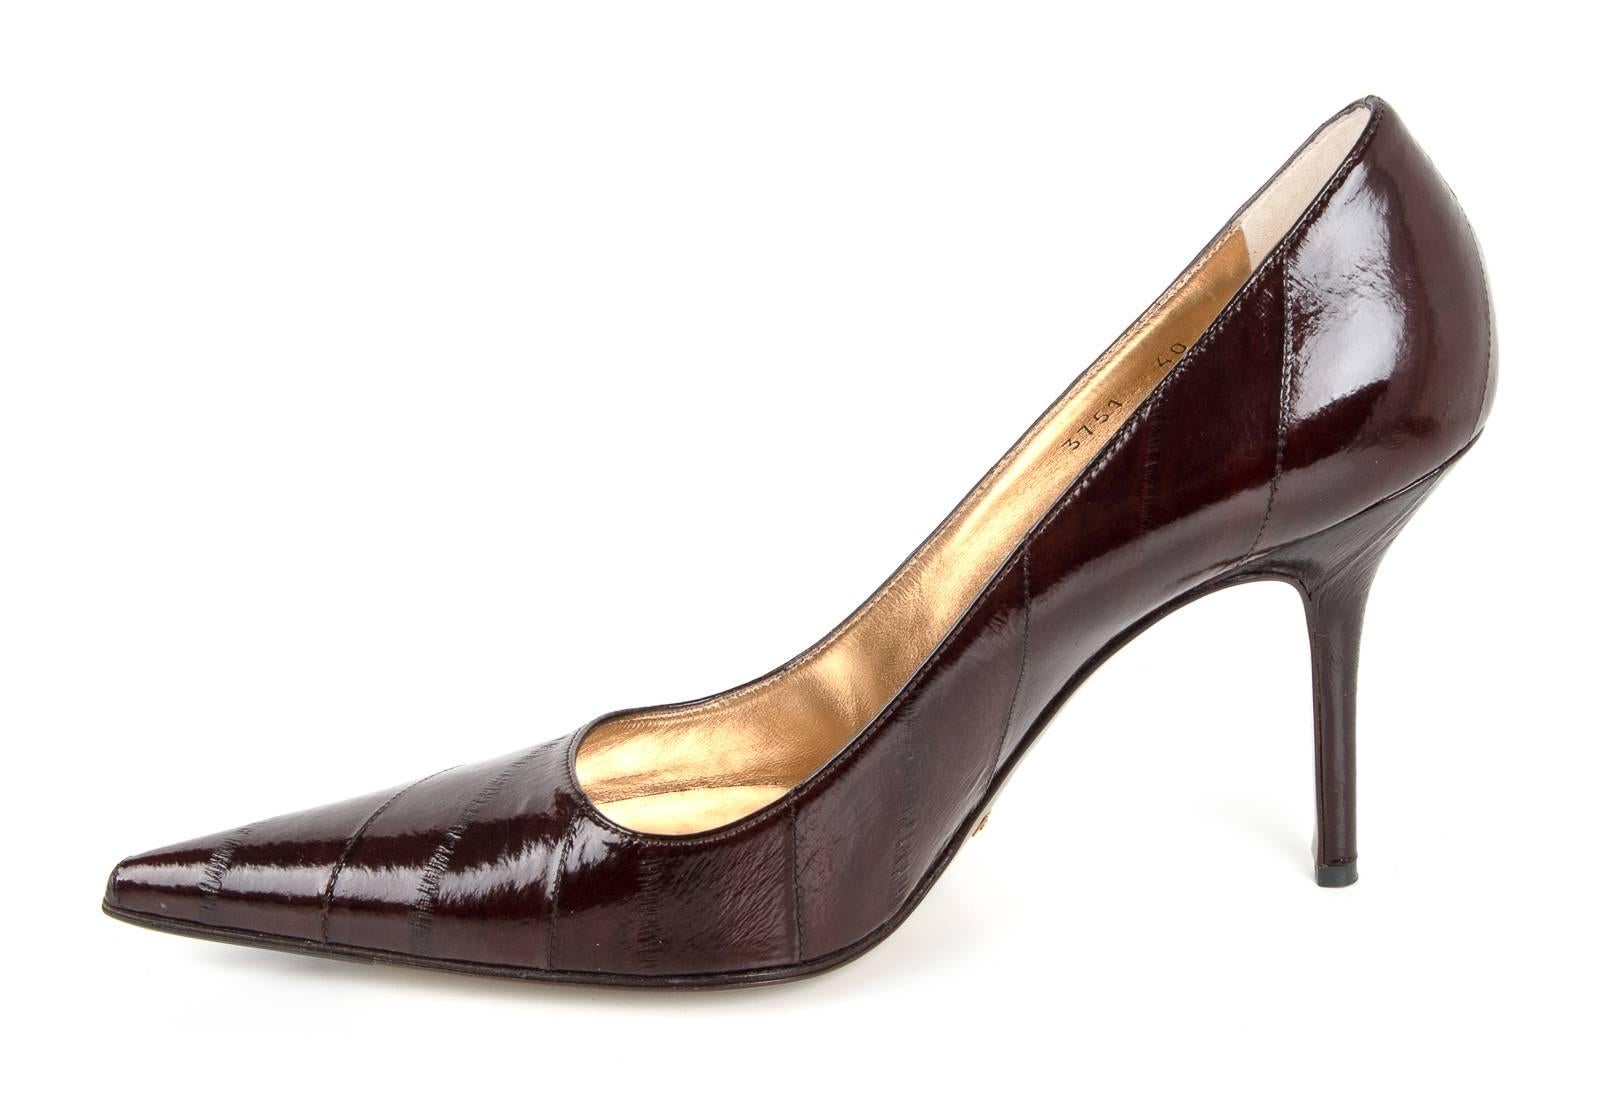 Guaranteed authentic Dolce&Gabbana signature pump in rich cordovan brown coloured eel skin.
The elongated pointy toe (which is making a comeback) does wonders to make your legs seem longer.
The ultimate classic pump that is ultra stylish and